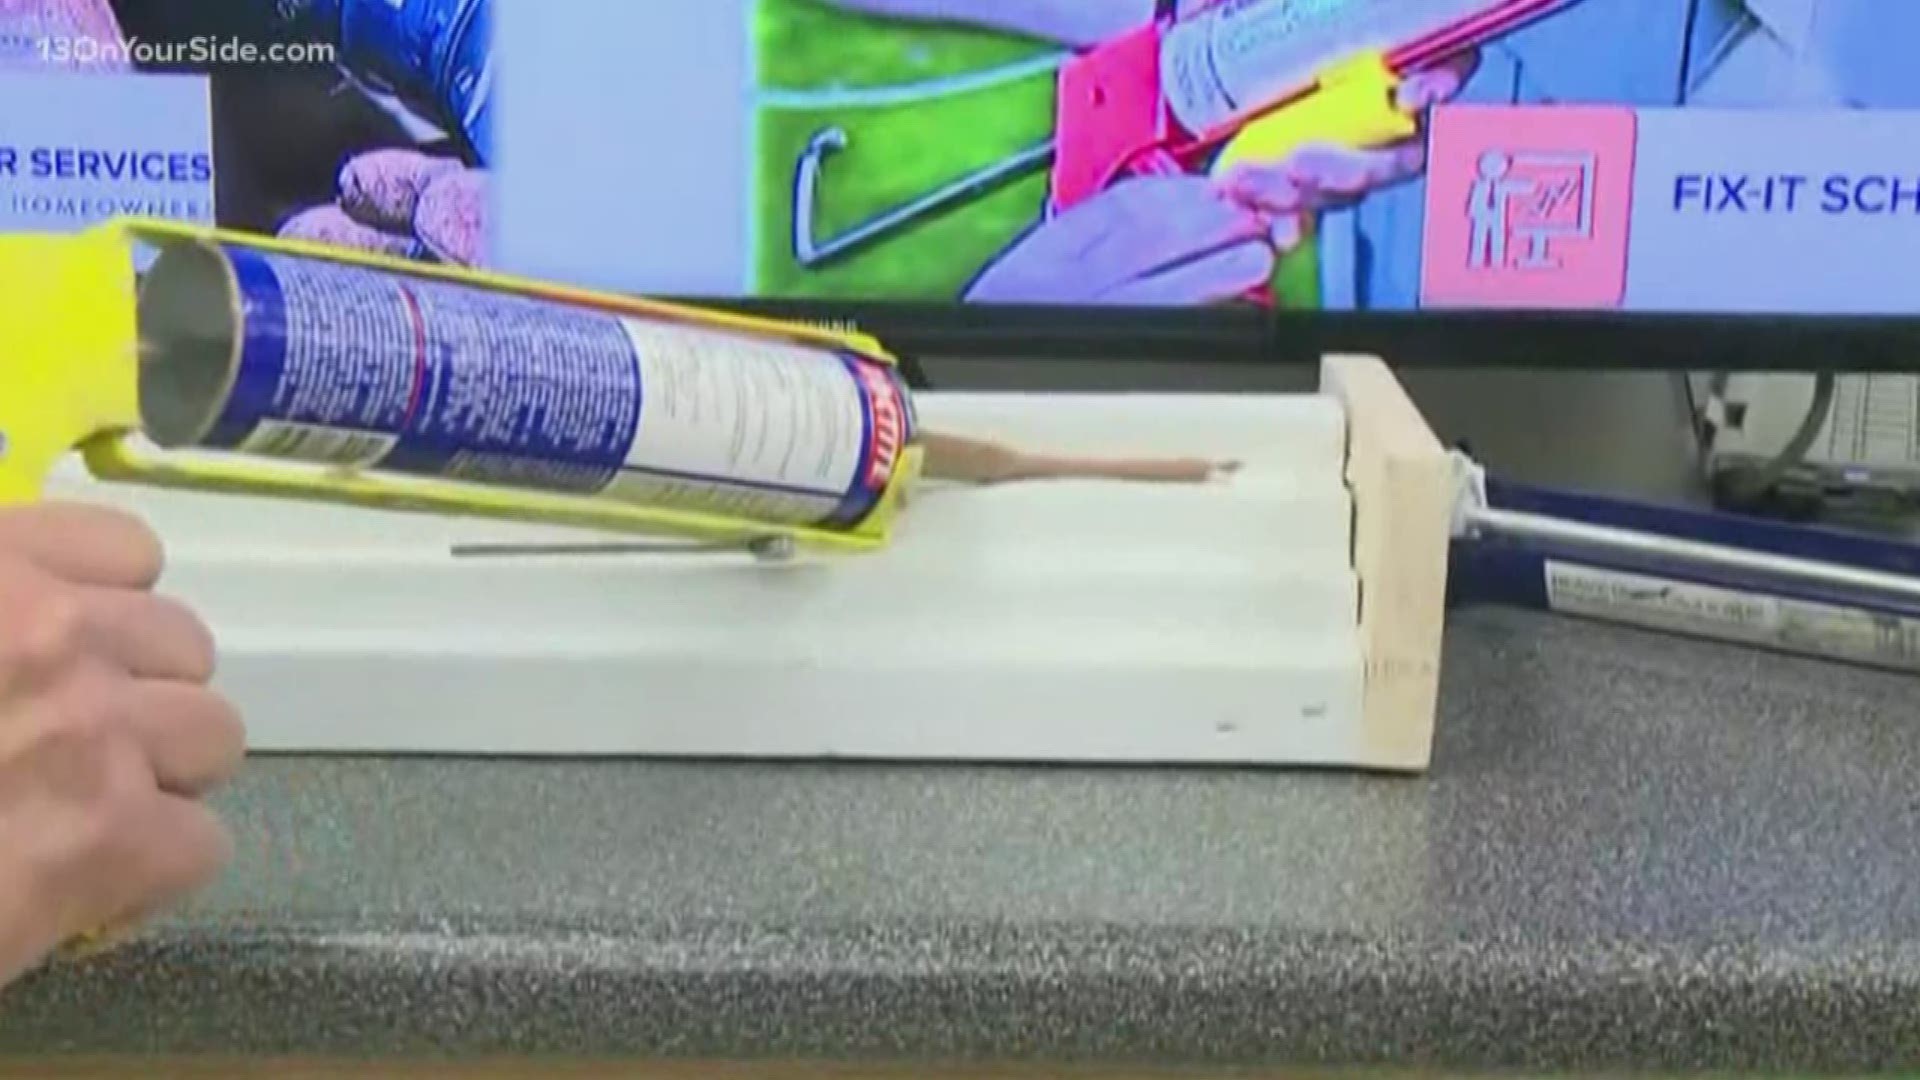 Summer is finally here and for many people in Michigan, that means starting up projects around the house. 13 ON YOUR SIDE's Kristin Mazur got some much needed tips from the experts at Home Repair Services.